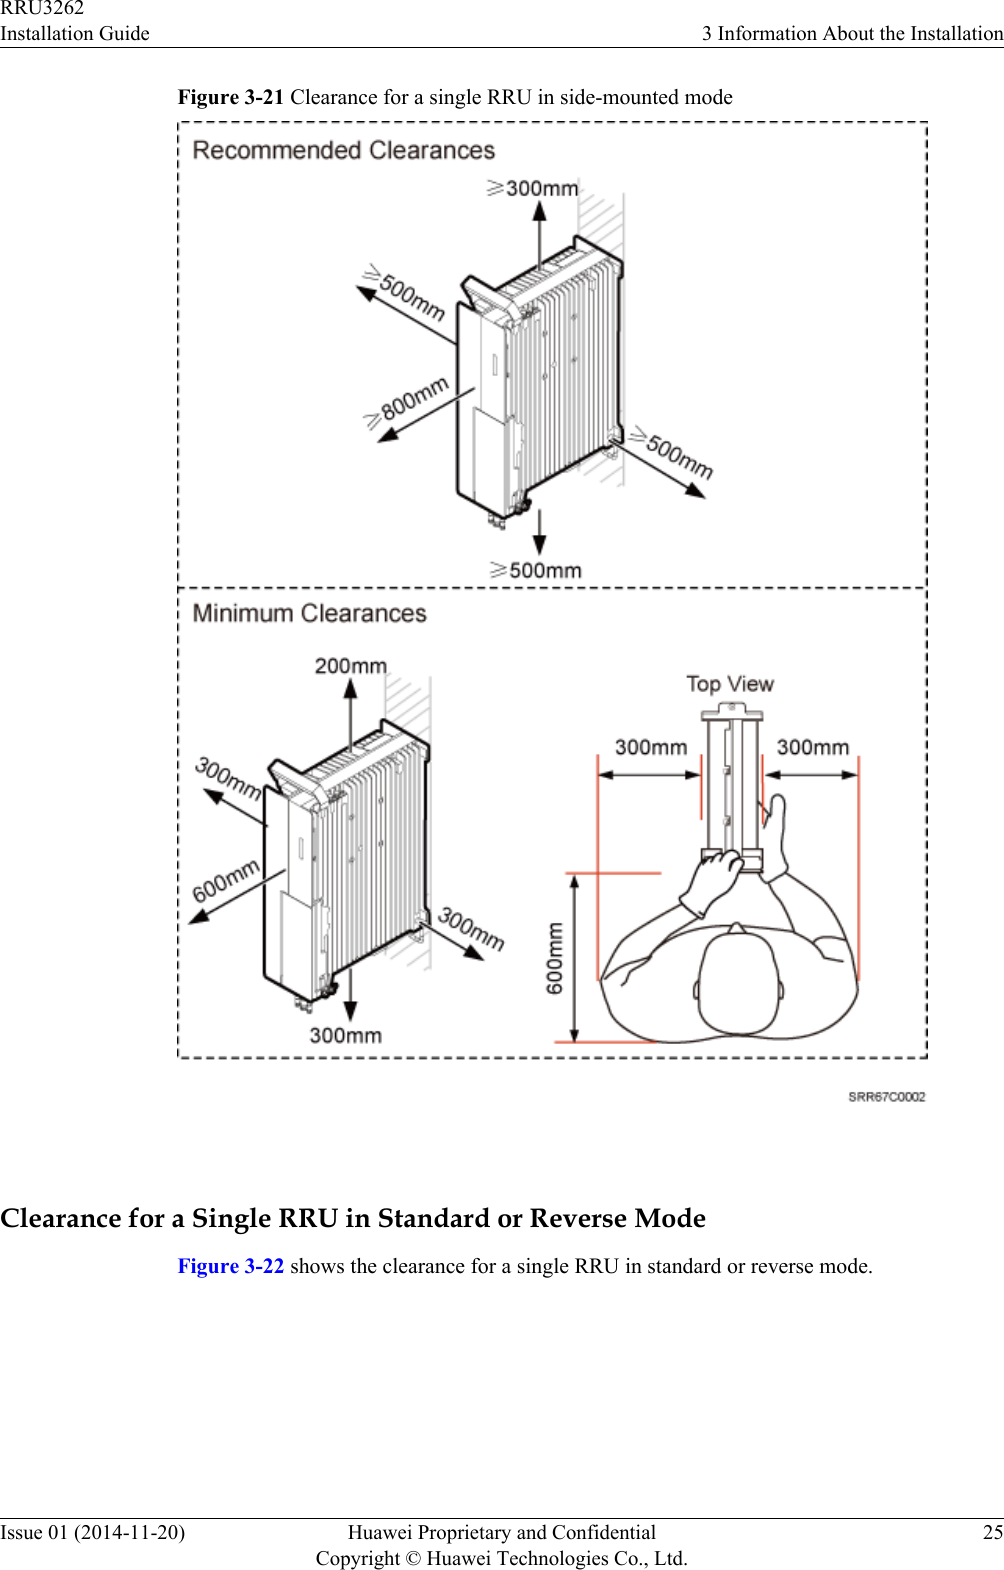 Figure 3-21 Clearance for a single RRU in side-mounted mode Clearance for a Single RRU in Standard or Reverse ModeFigure 3-22 shows the clearance for a single RRU in standard or reverse mode.RRU3262Installation Guide 3 Information About the InstallationIssue 01 (2014-11-20) Huawei Proprietary and ConfidentialCopyright © Huawei Technologies Co., Ltd.25